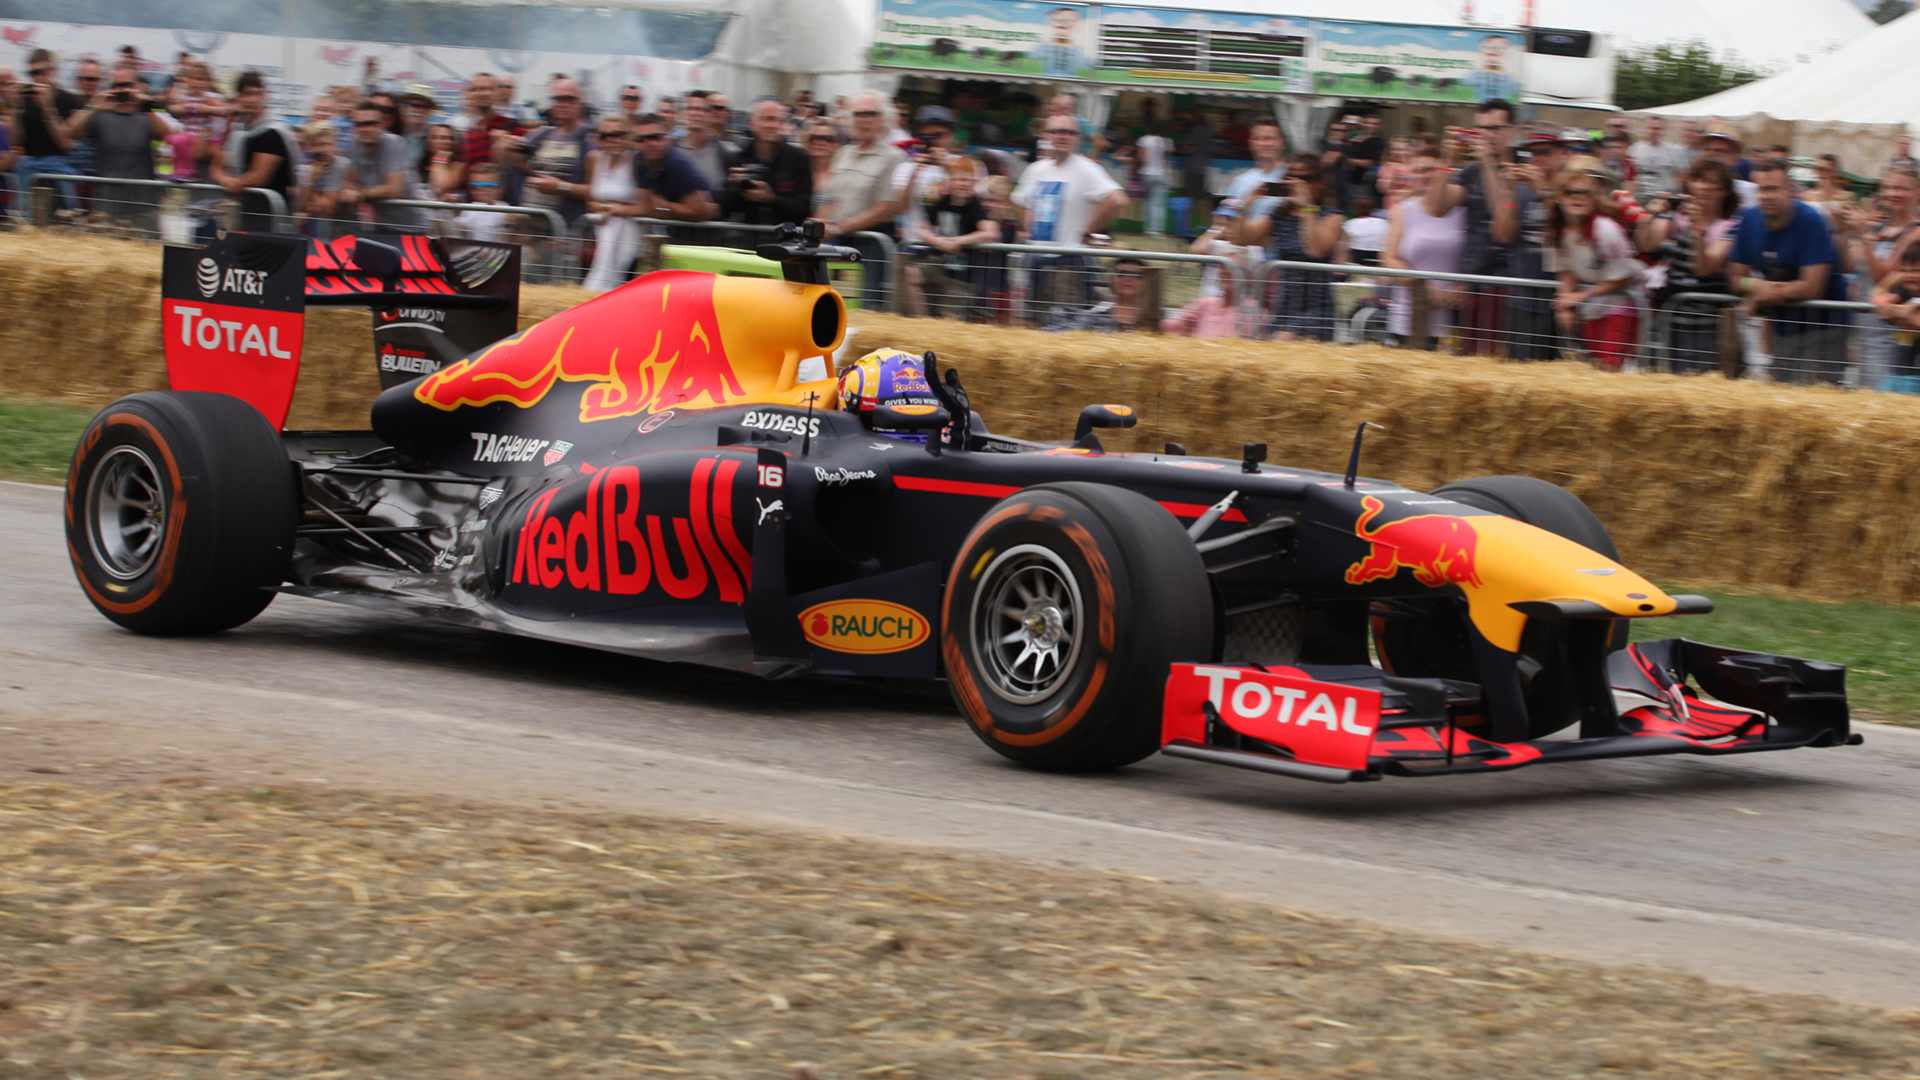 F1 Cars Will Return To Nurburgring Nordschleife As Part Of Red Bull Promo Event Carscoops